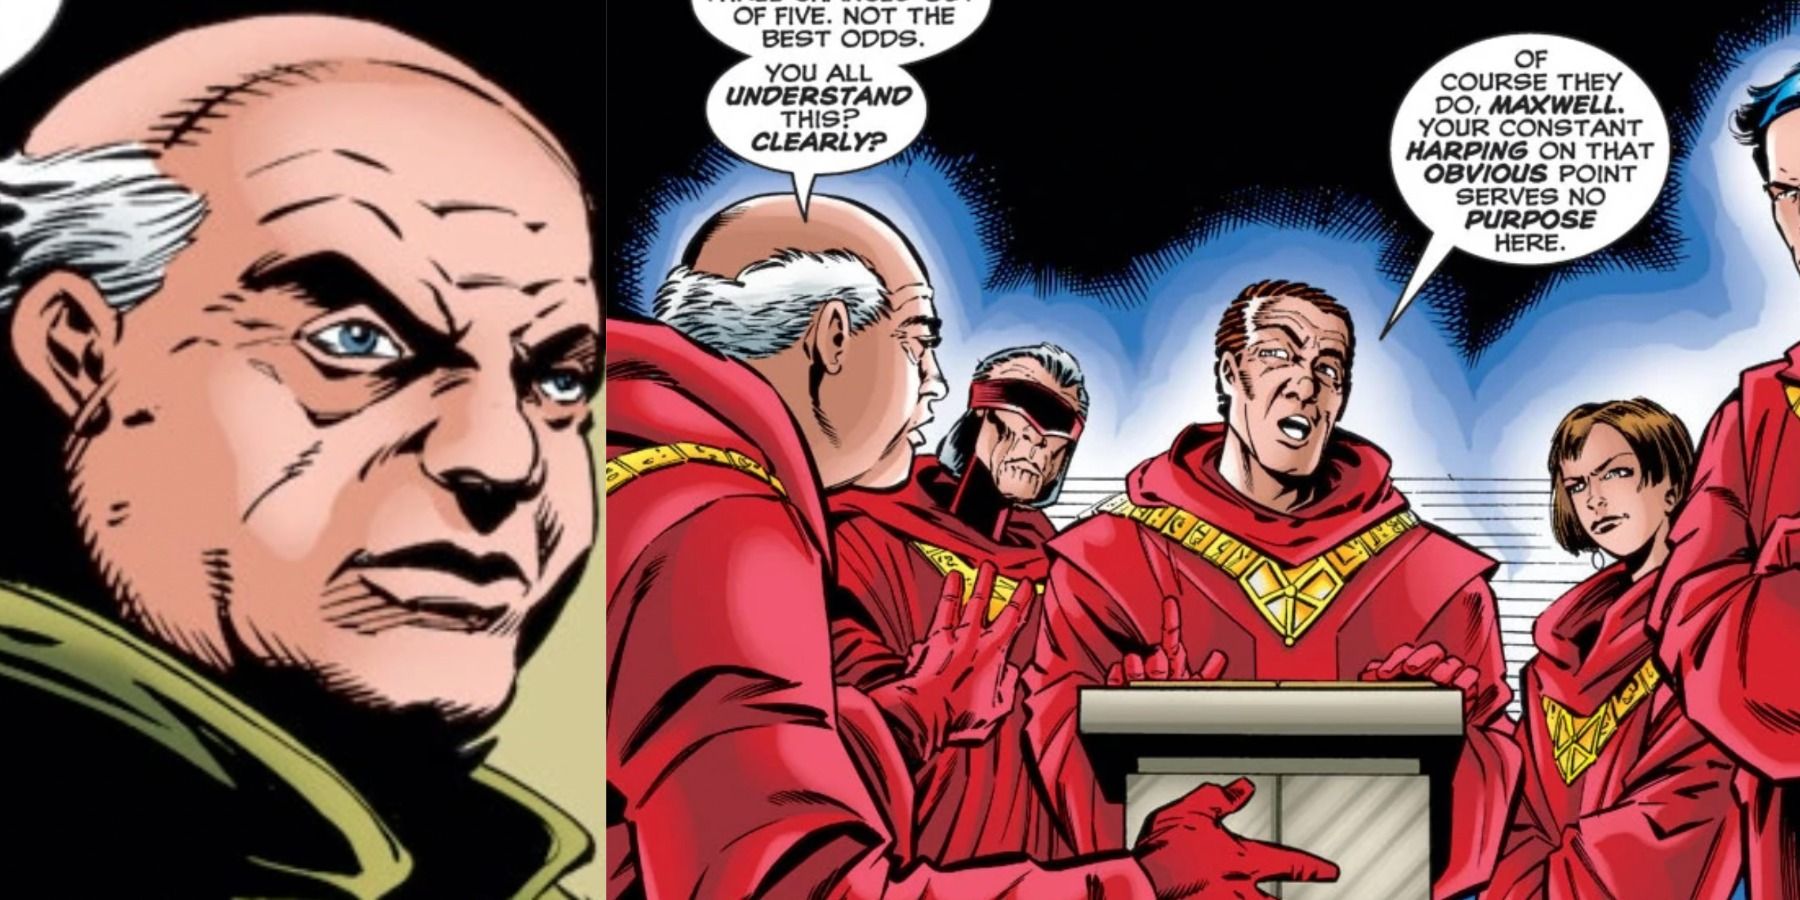 A split image depicts Morris Maxwell alone and as part of the Gathering of the Five in Marvel comics